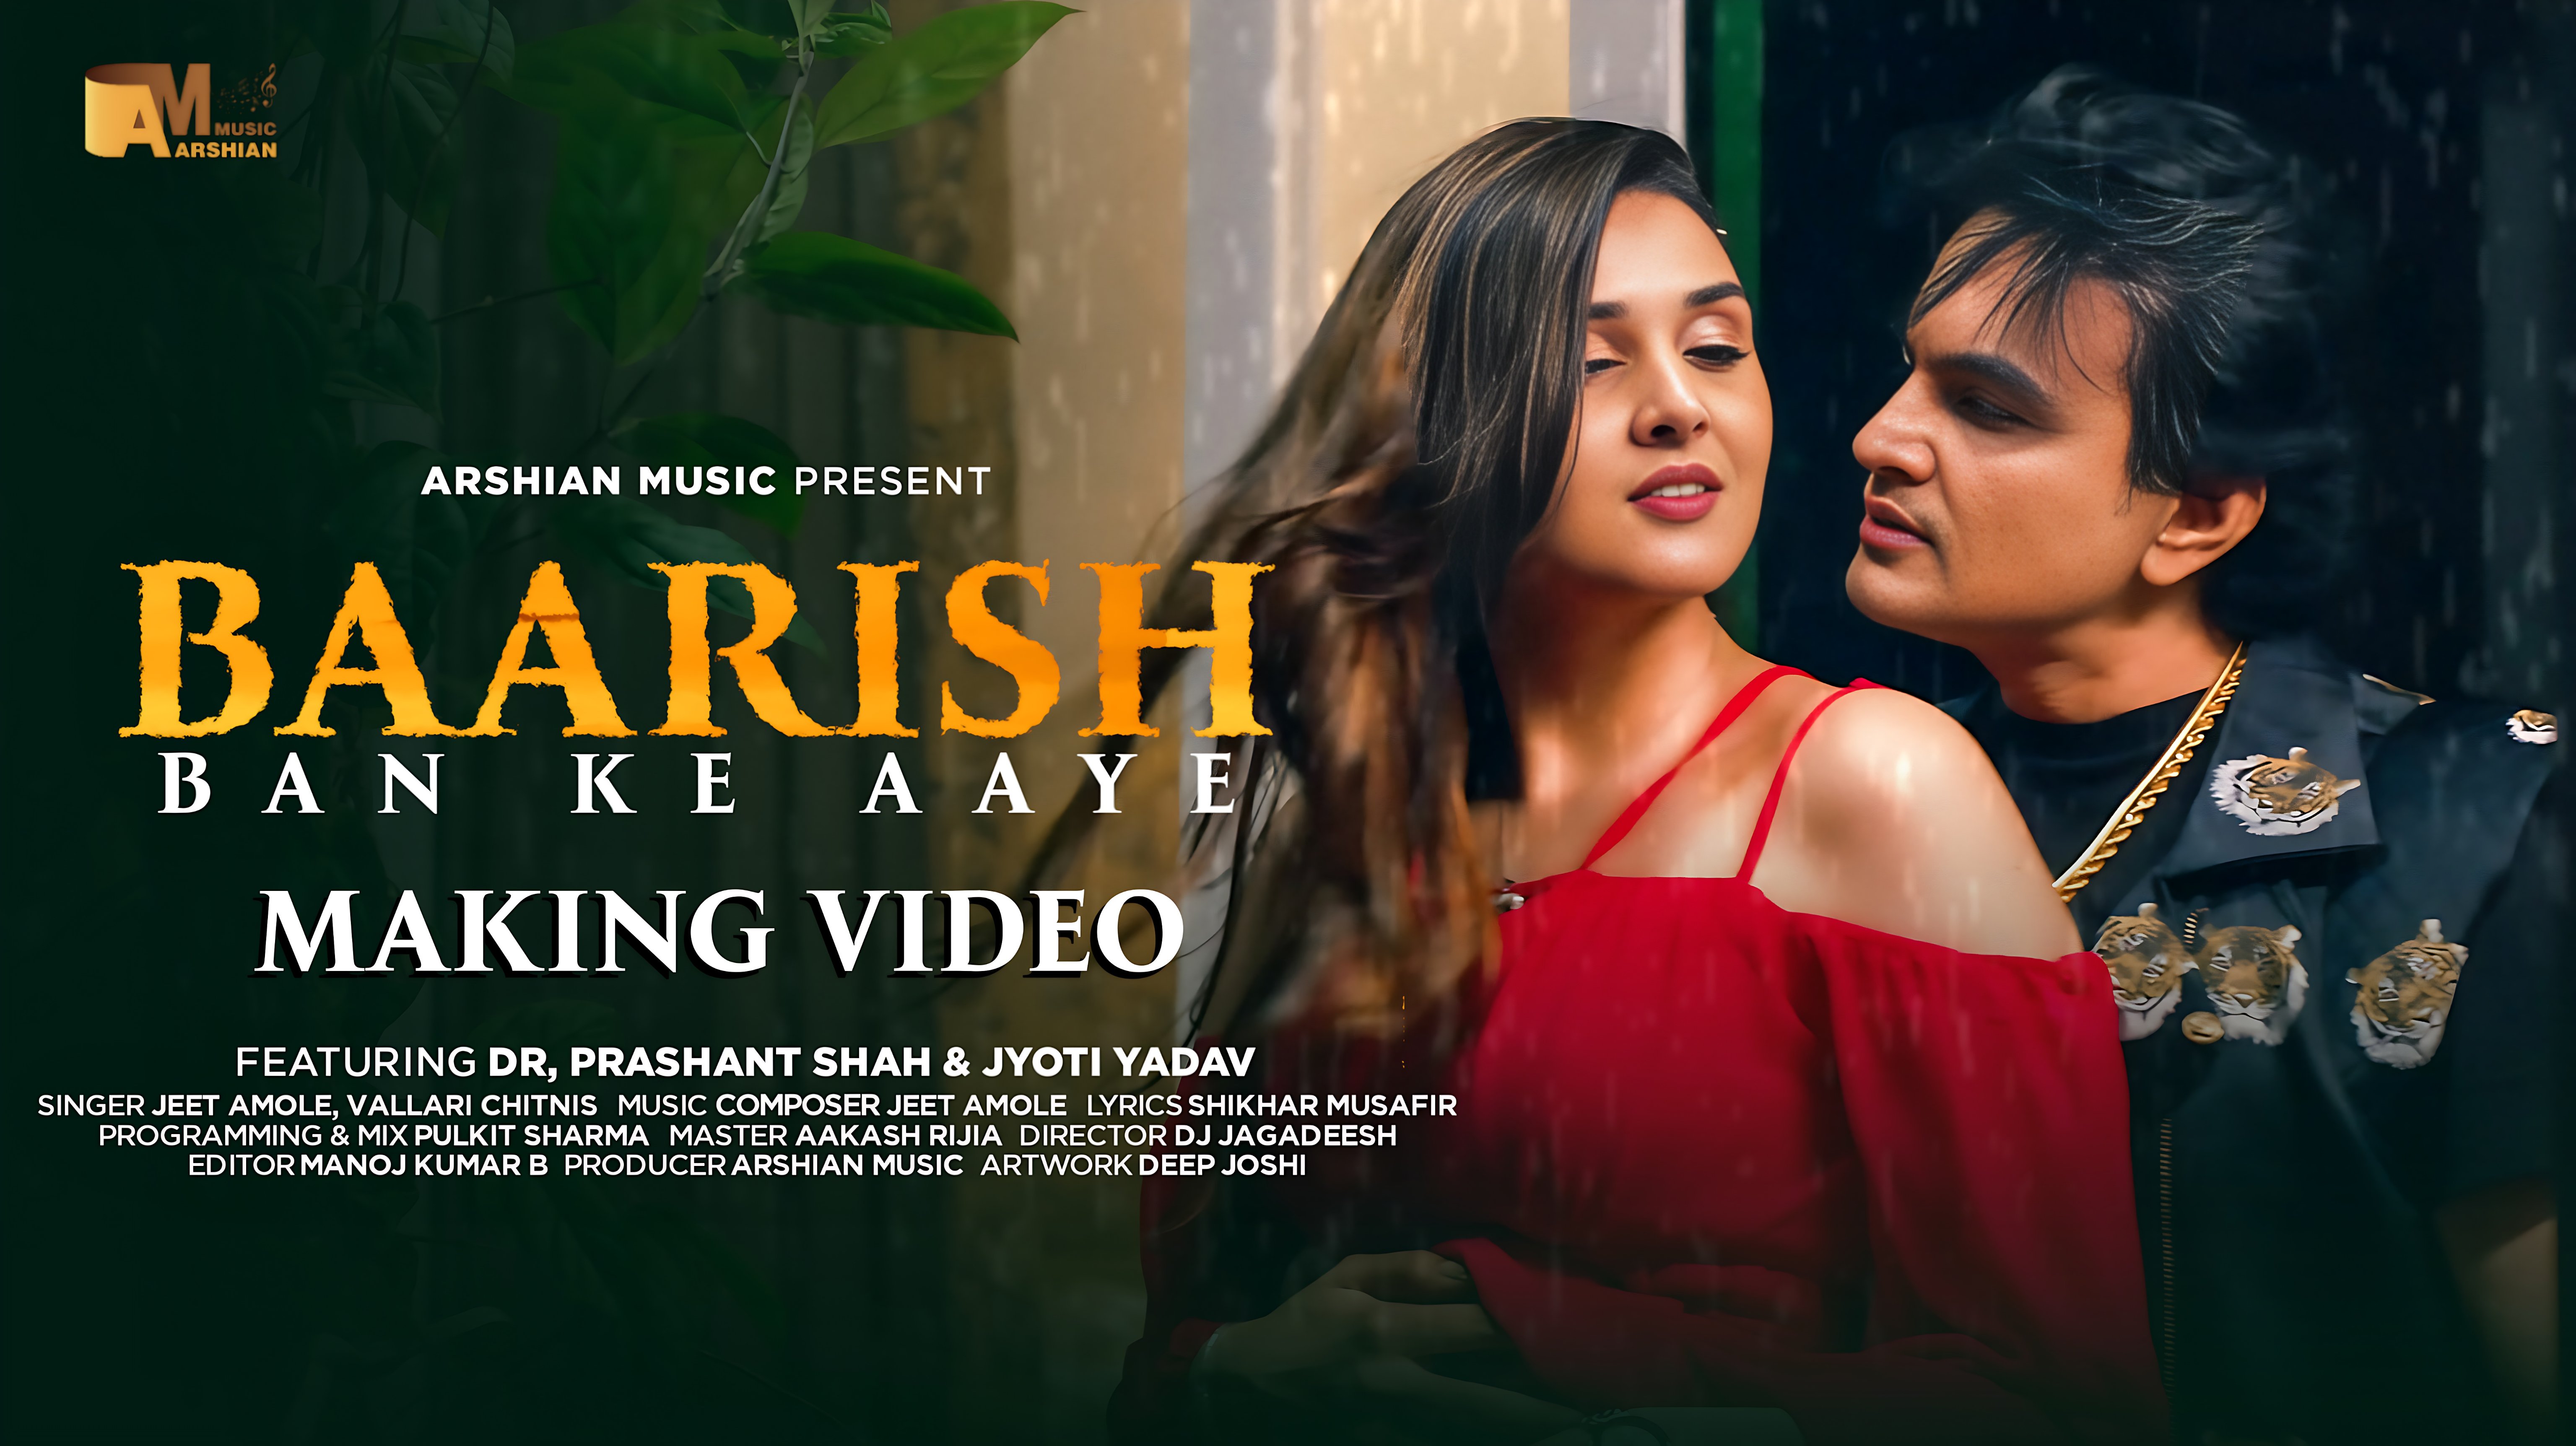 Movies and Music Production Company - Arshian Music